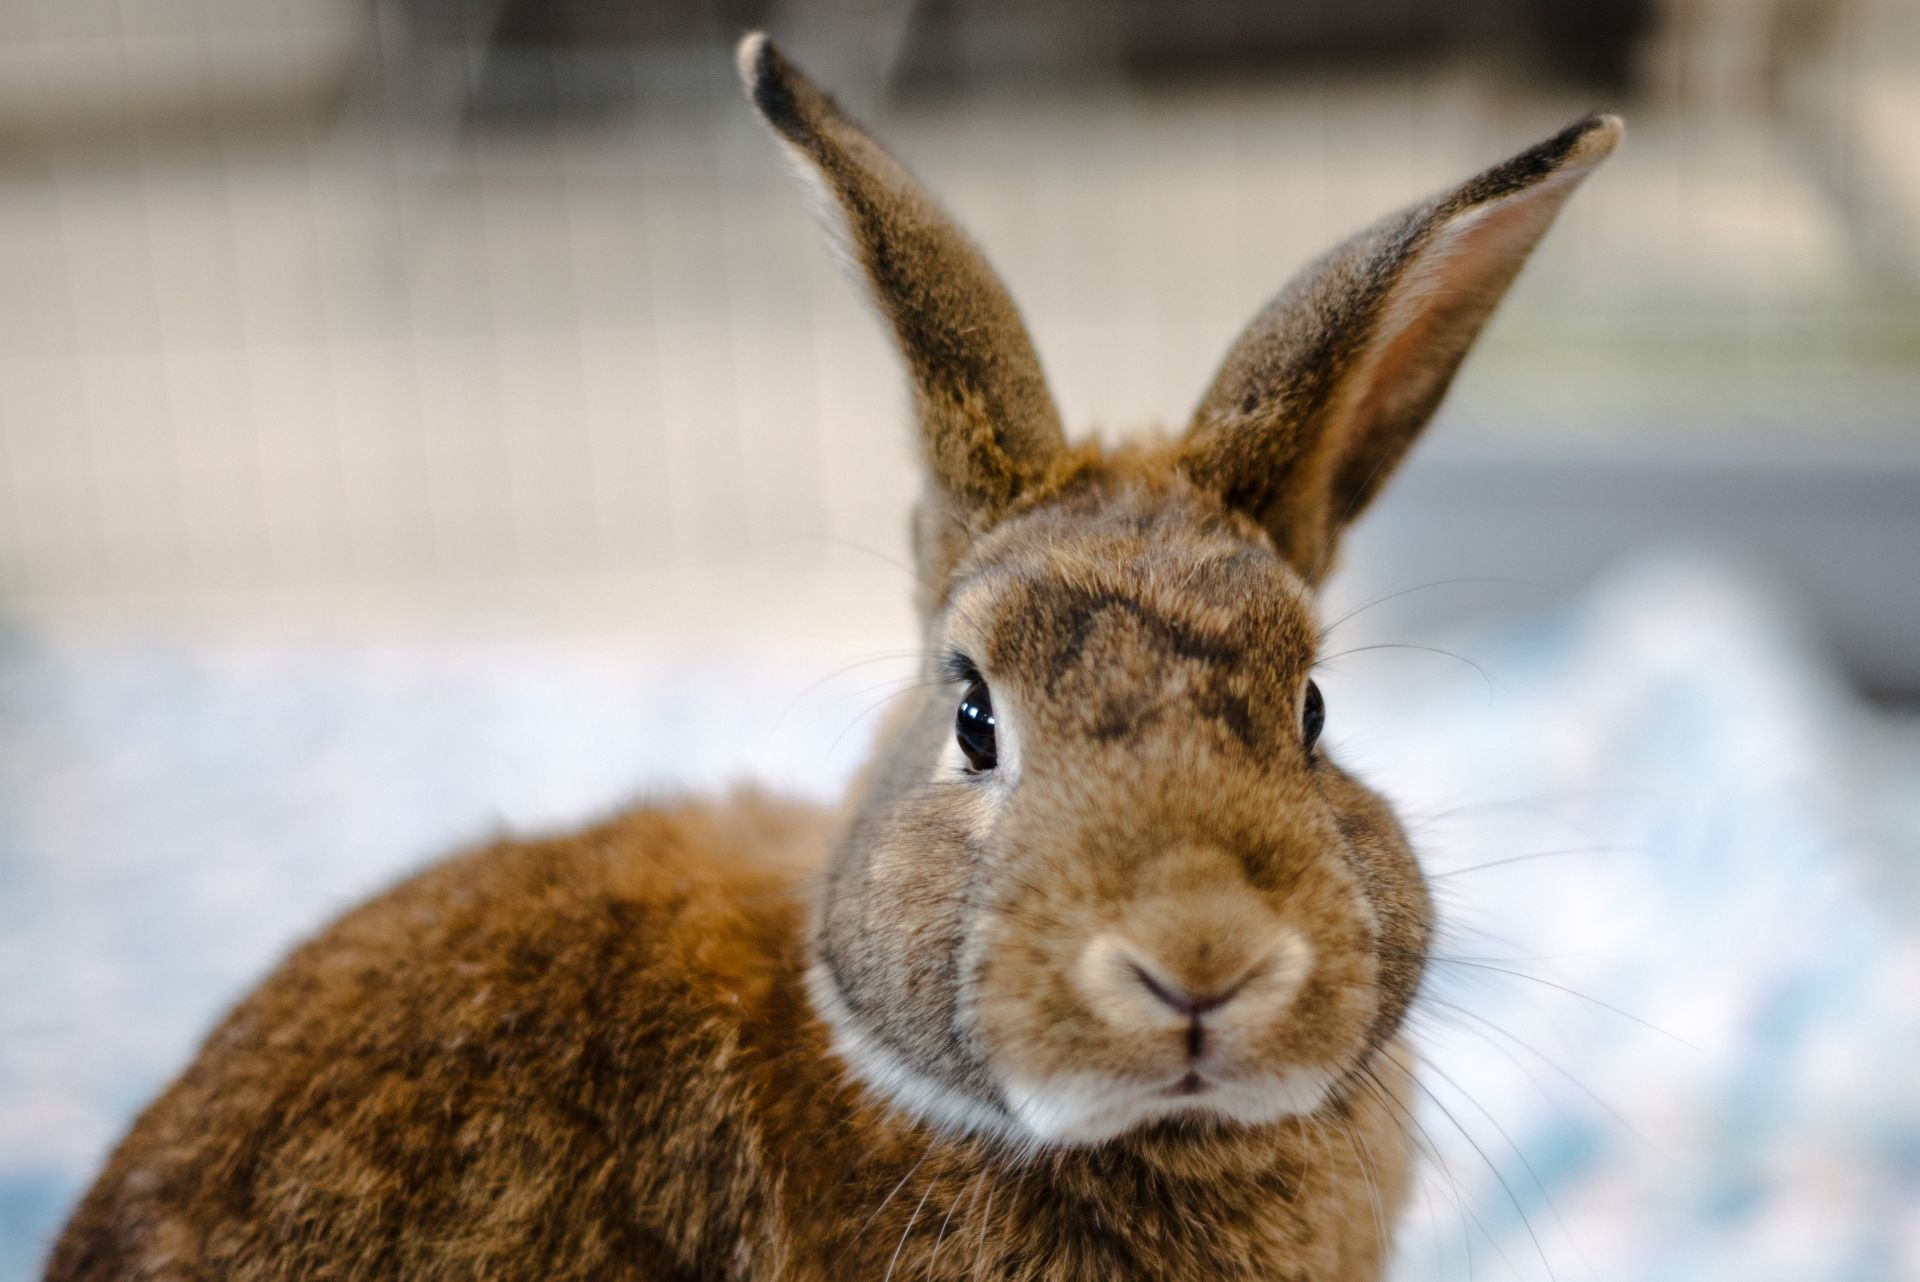 Alvin the brown shelter bunny posing for the camera